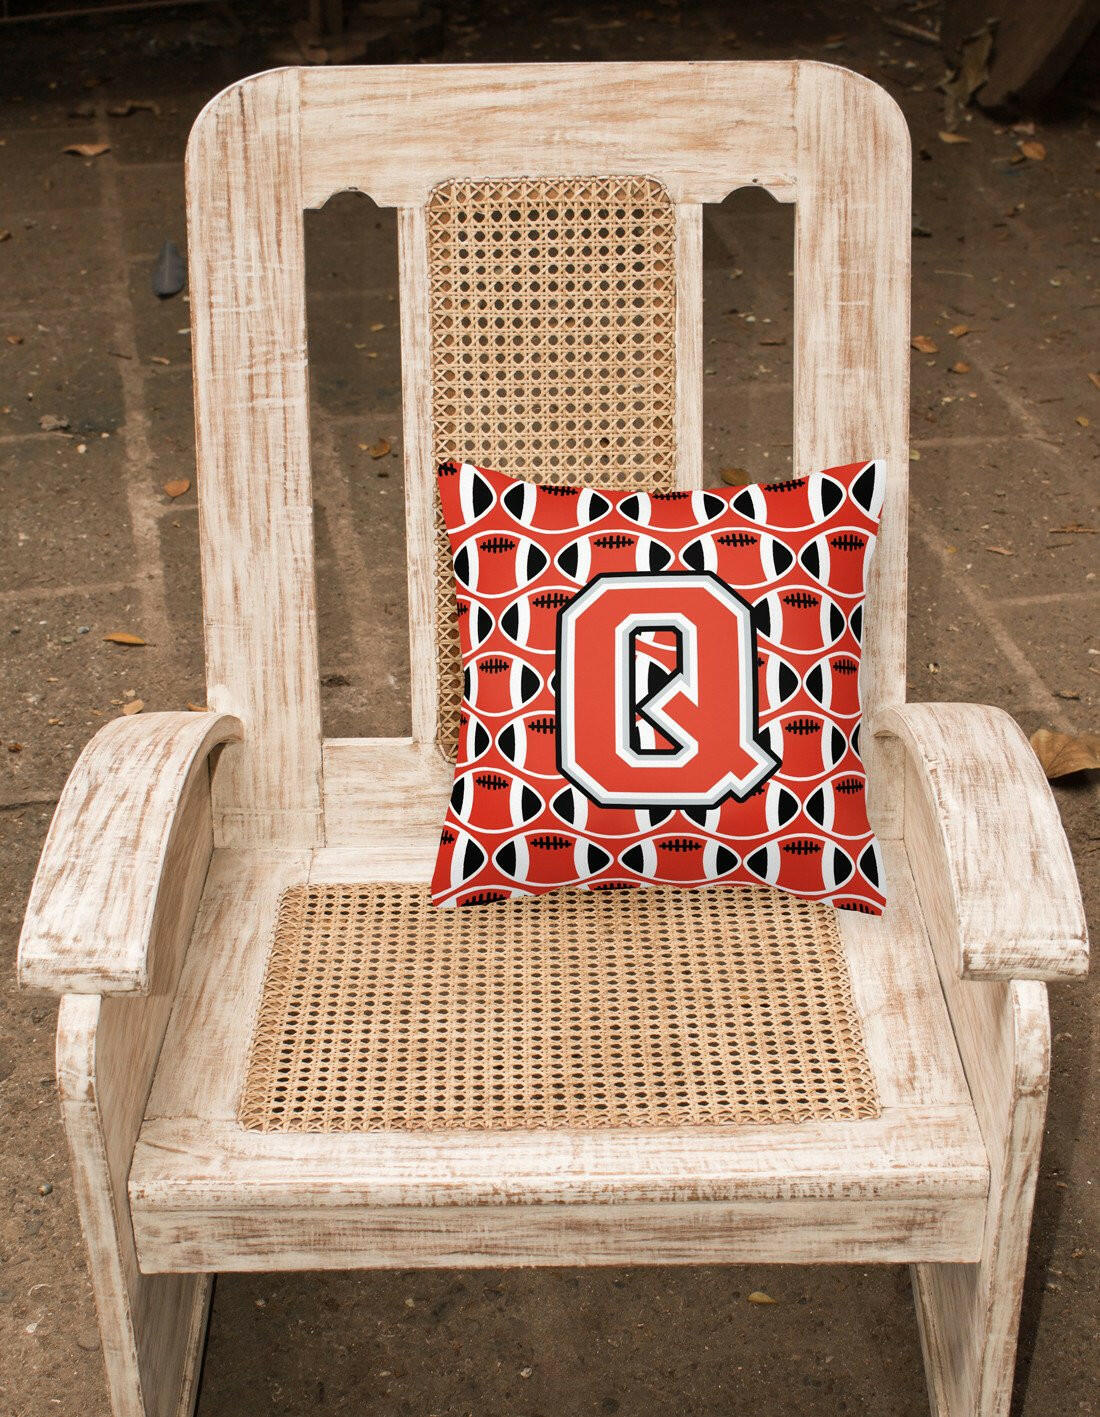 Letter Q Football Scarlet and Grey Fabric Decorative Pillow CJ1067-QPW1414 by Caroline's Treasures